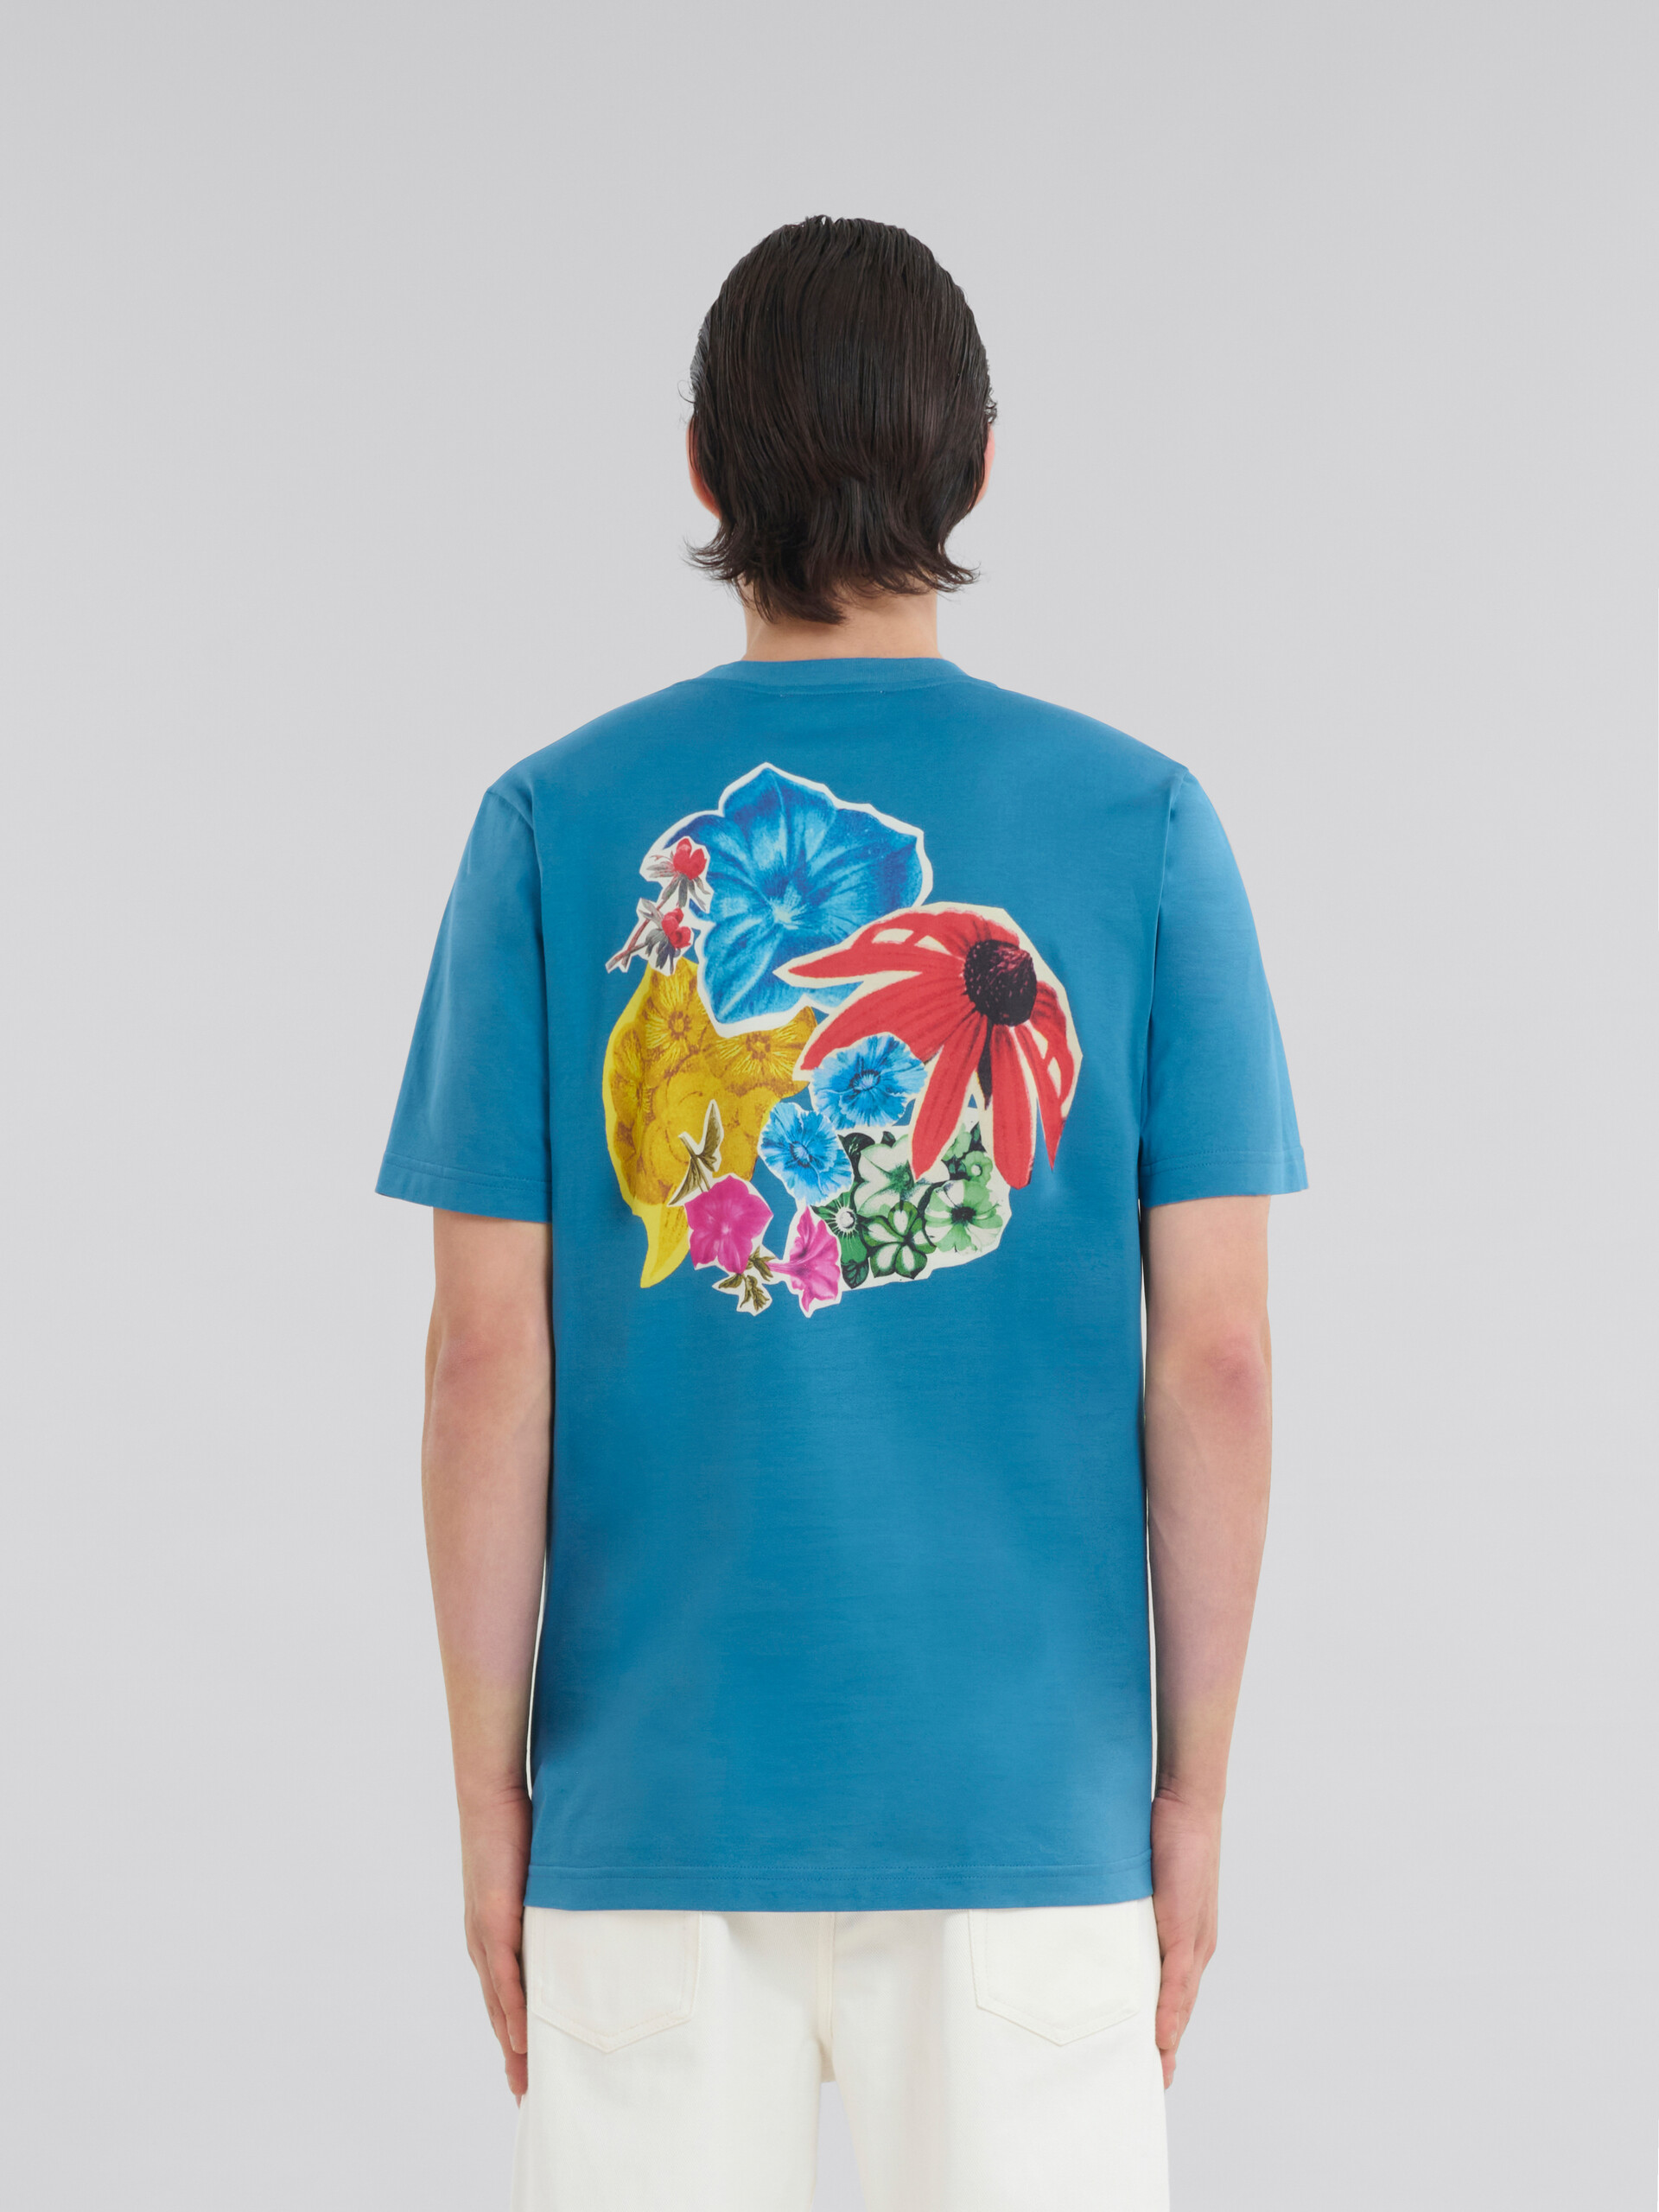 Blue cotton T-shirt with back flower print - T-shirts - Image 3